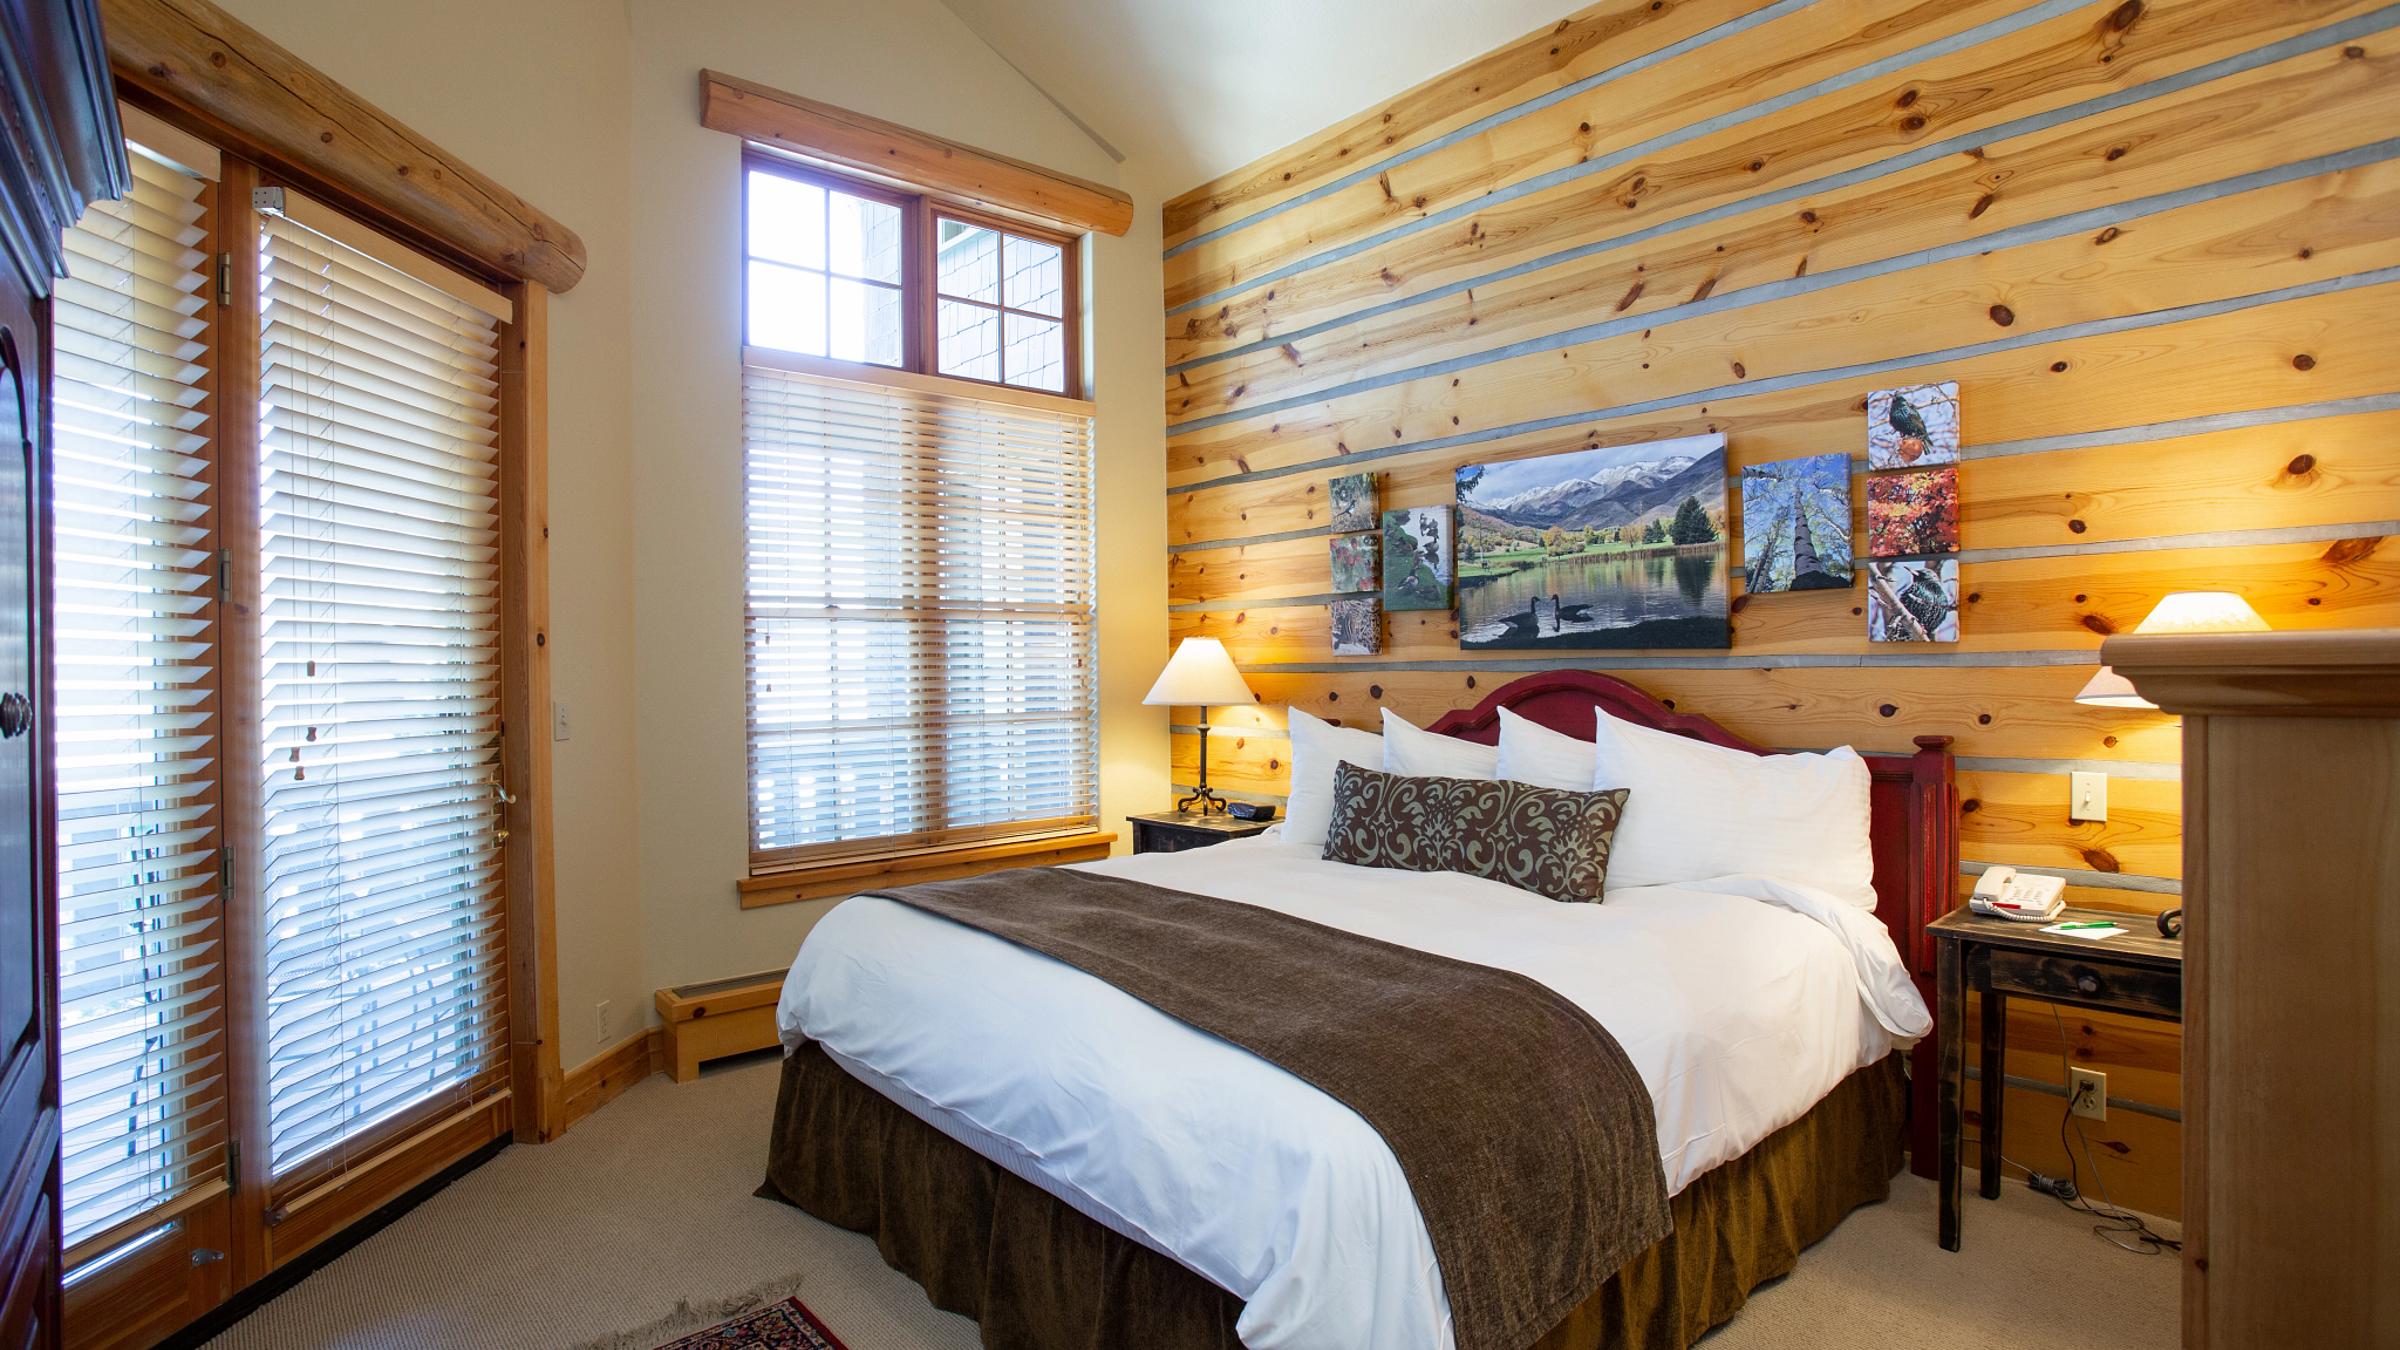 Deluxe hotel room at Lodges at Deer Valley